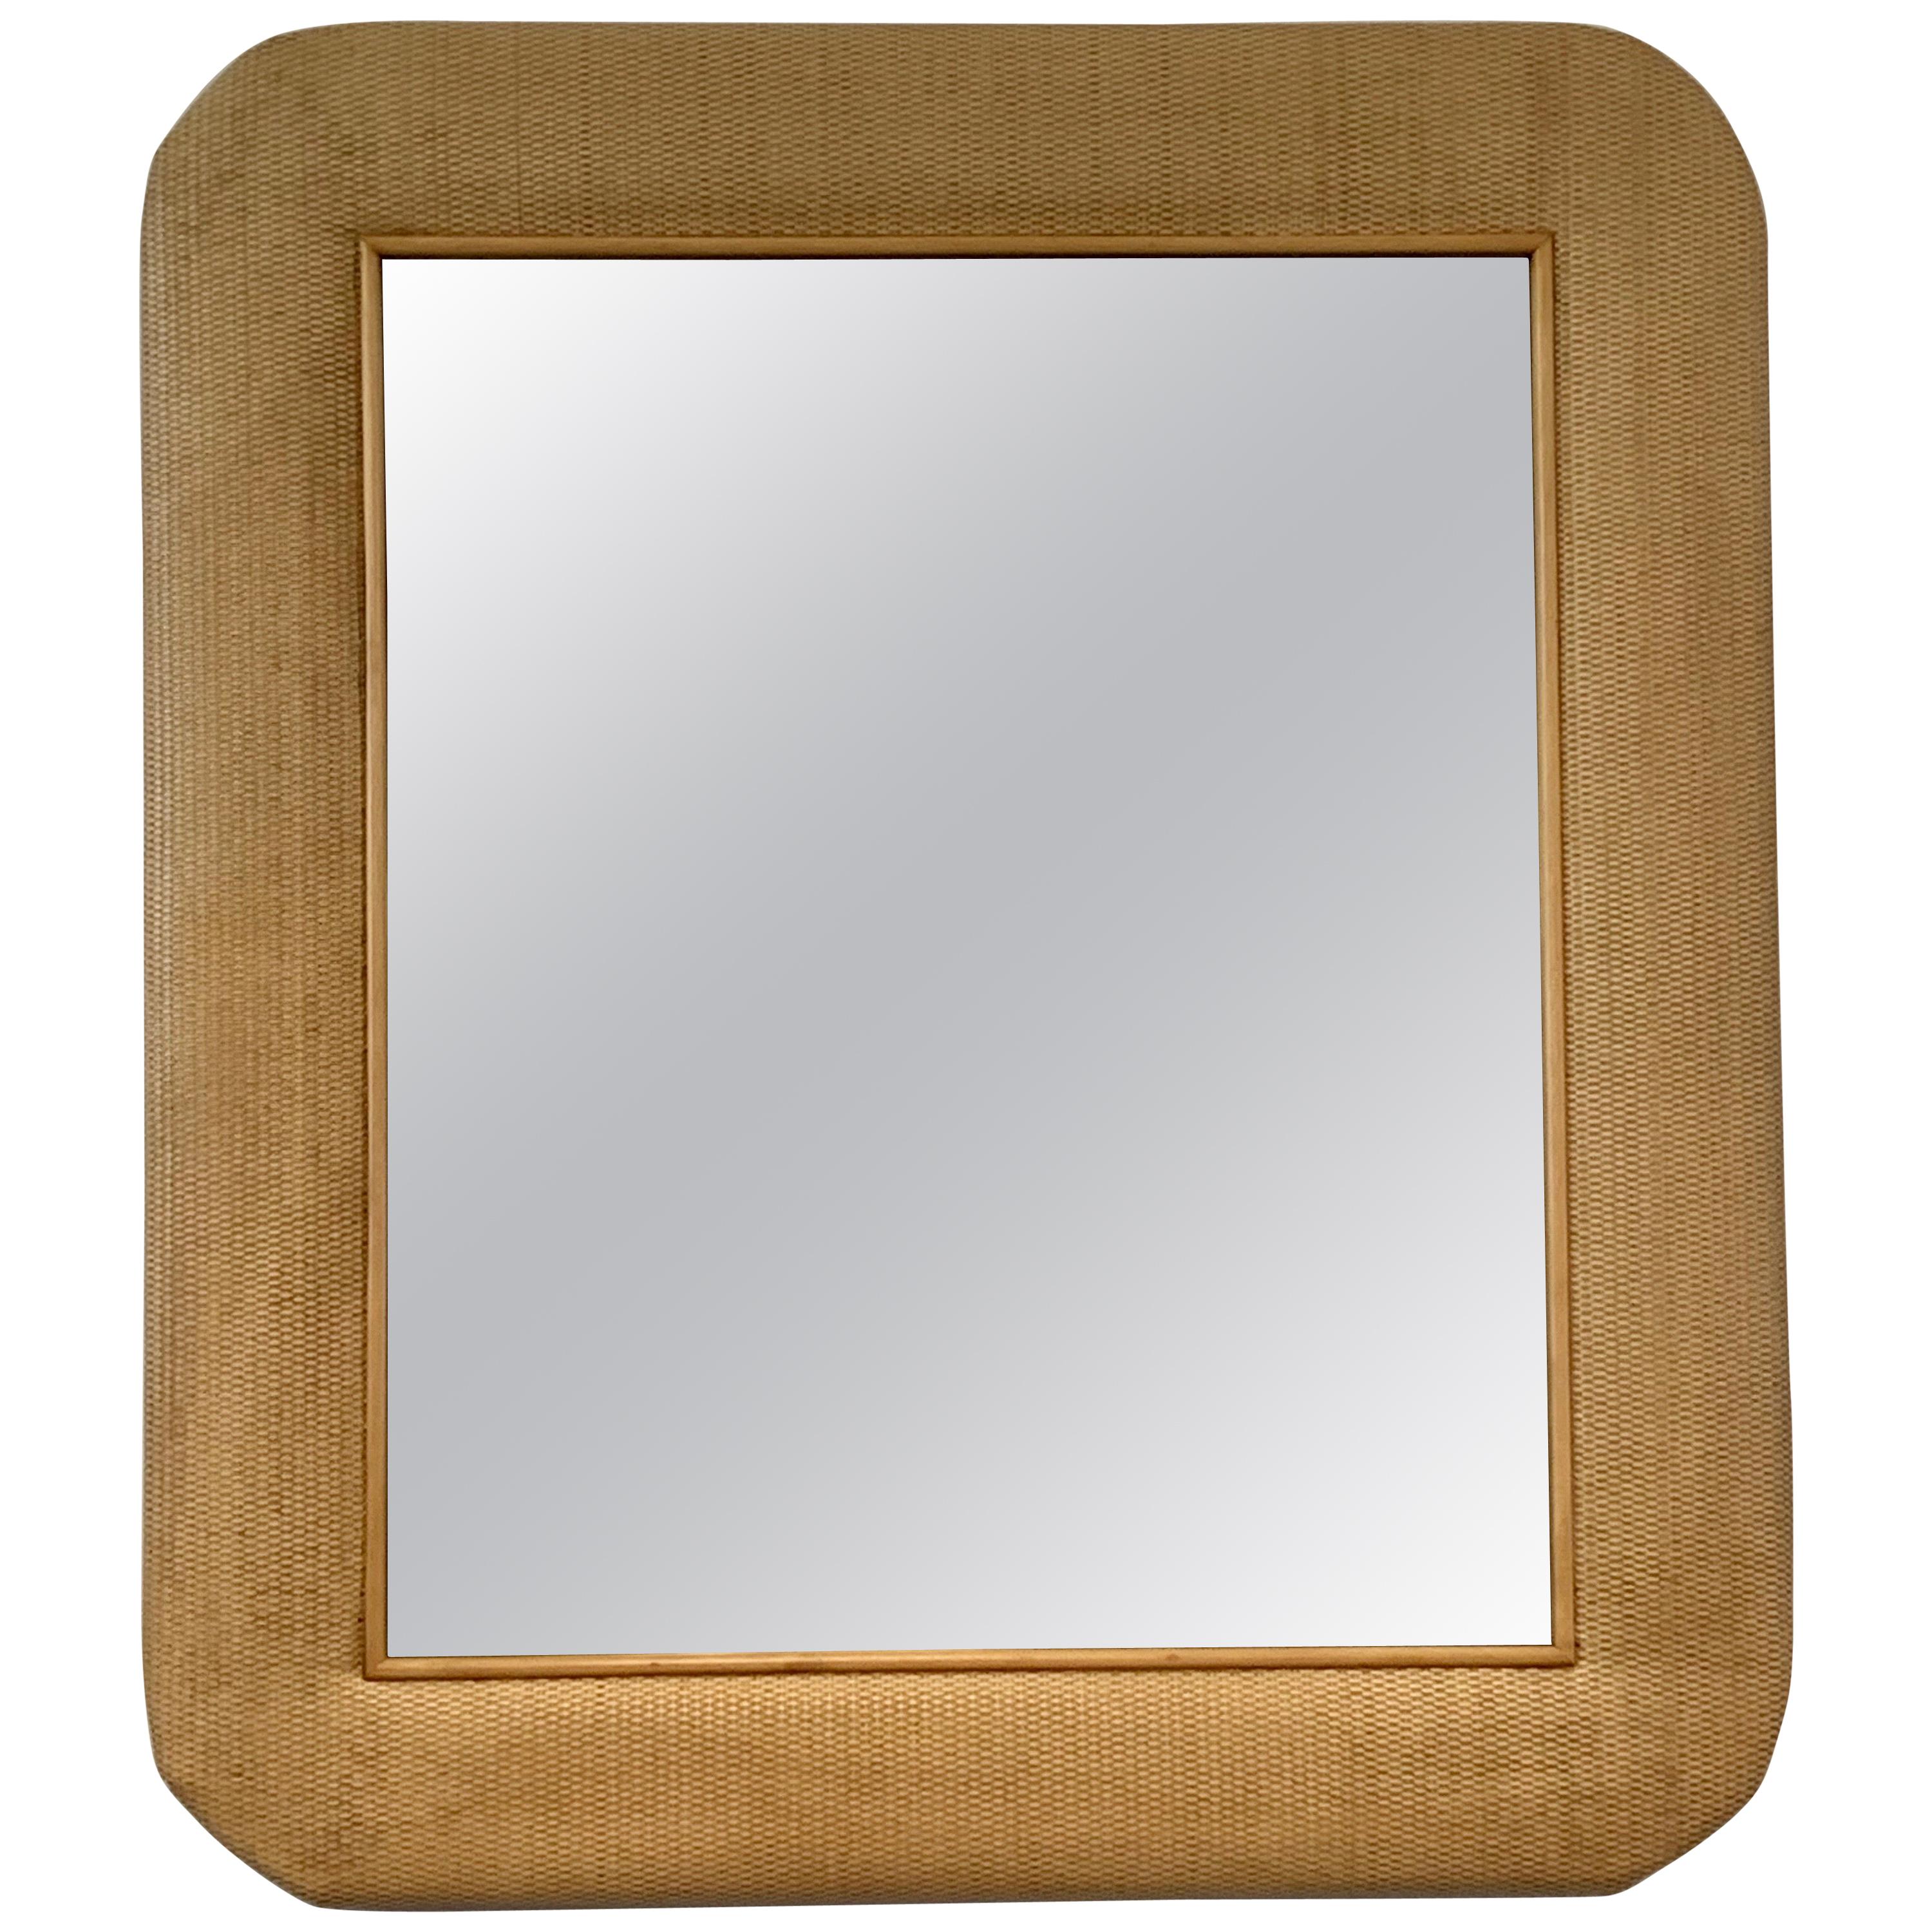 Natural Rattan Weave Over-Sized Mirror For Sale